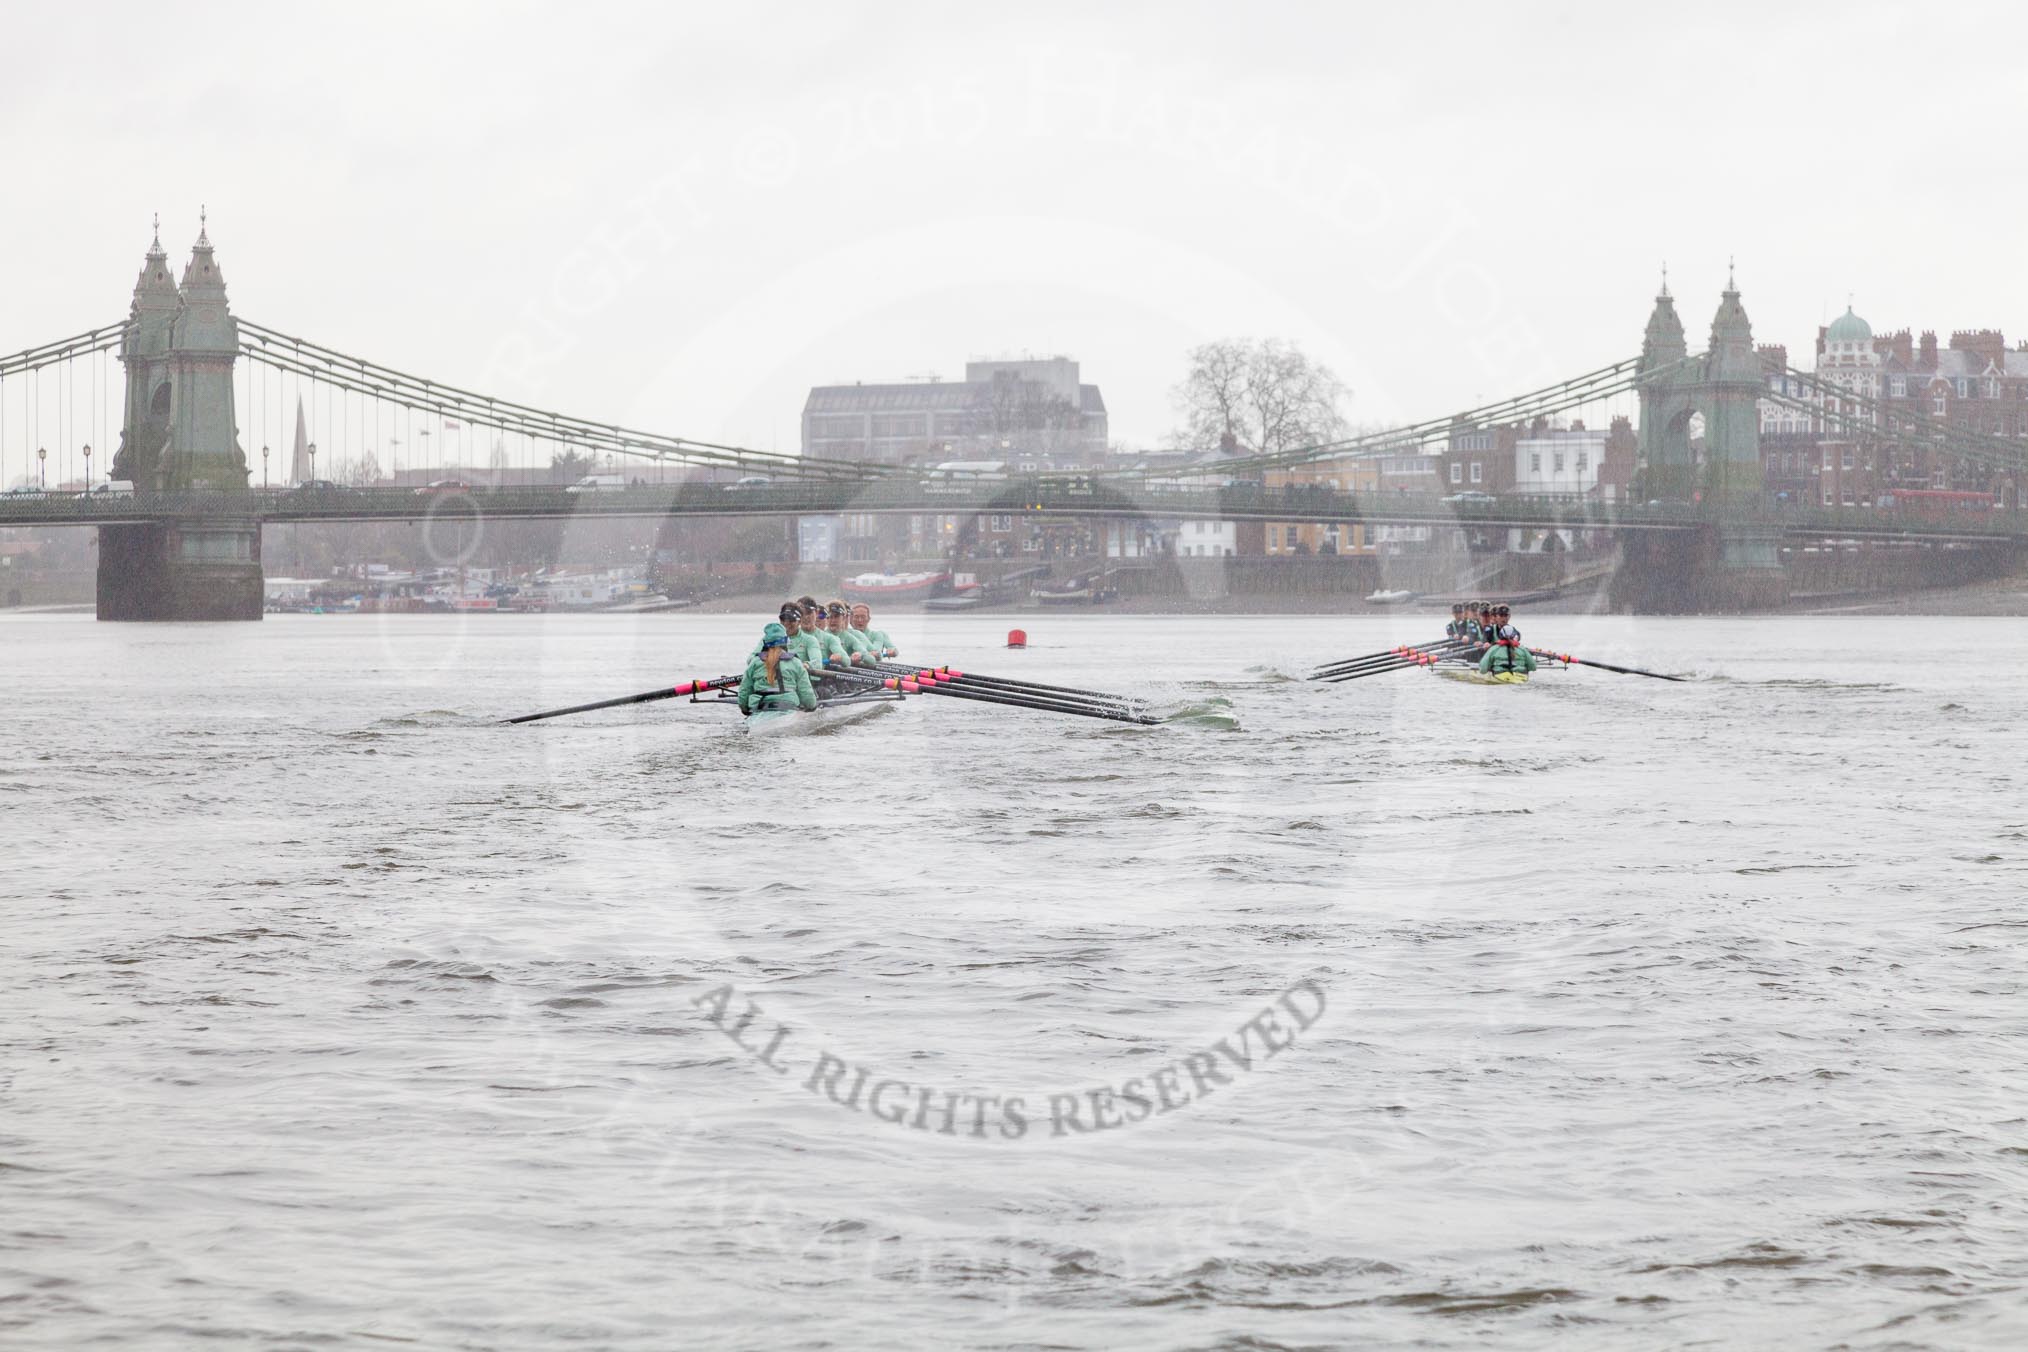 The Boat Race season 2016 - Women's Boat Race Trial Eights (CUWBC, Cambridge): "Tideway" chasing "Twickenham" on the approach to Hammersmith Bridge.
River Thames between Putney Bridge and Mortlake,
London SW15,

United Kingdom,
on 10 December 2015 at 11:10, image #76